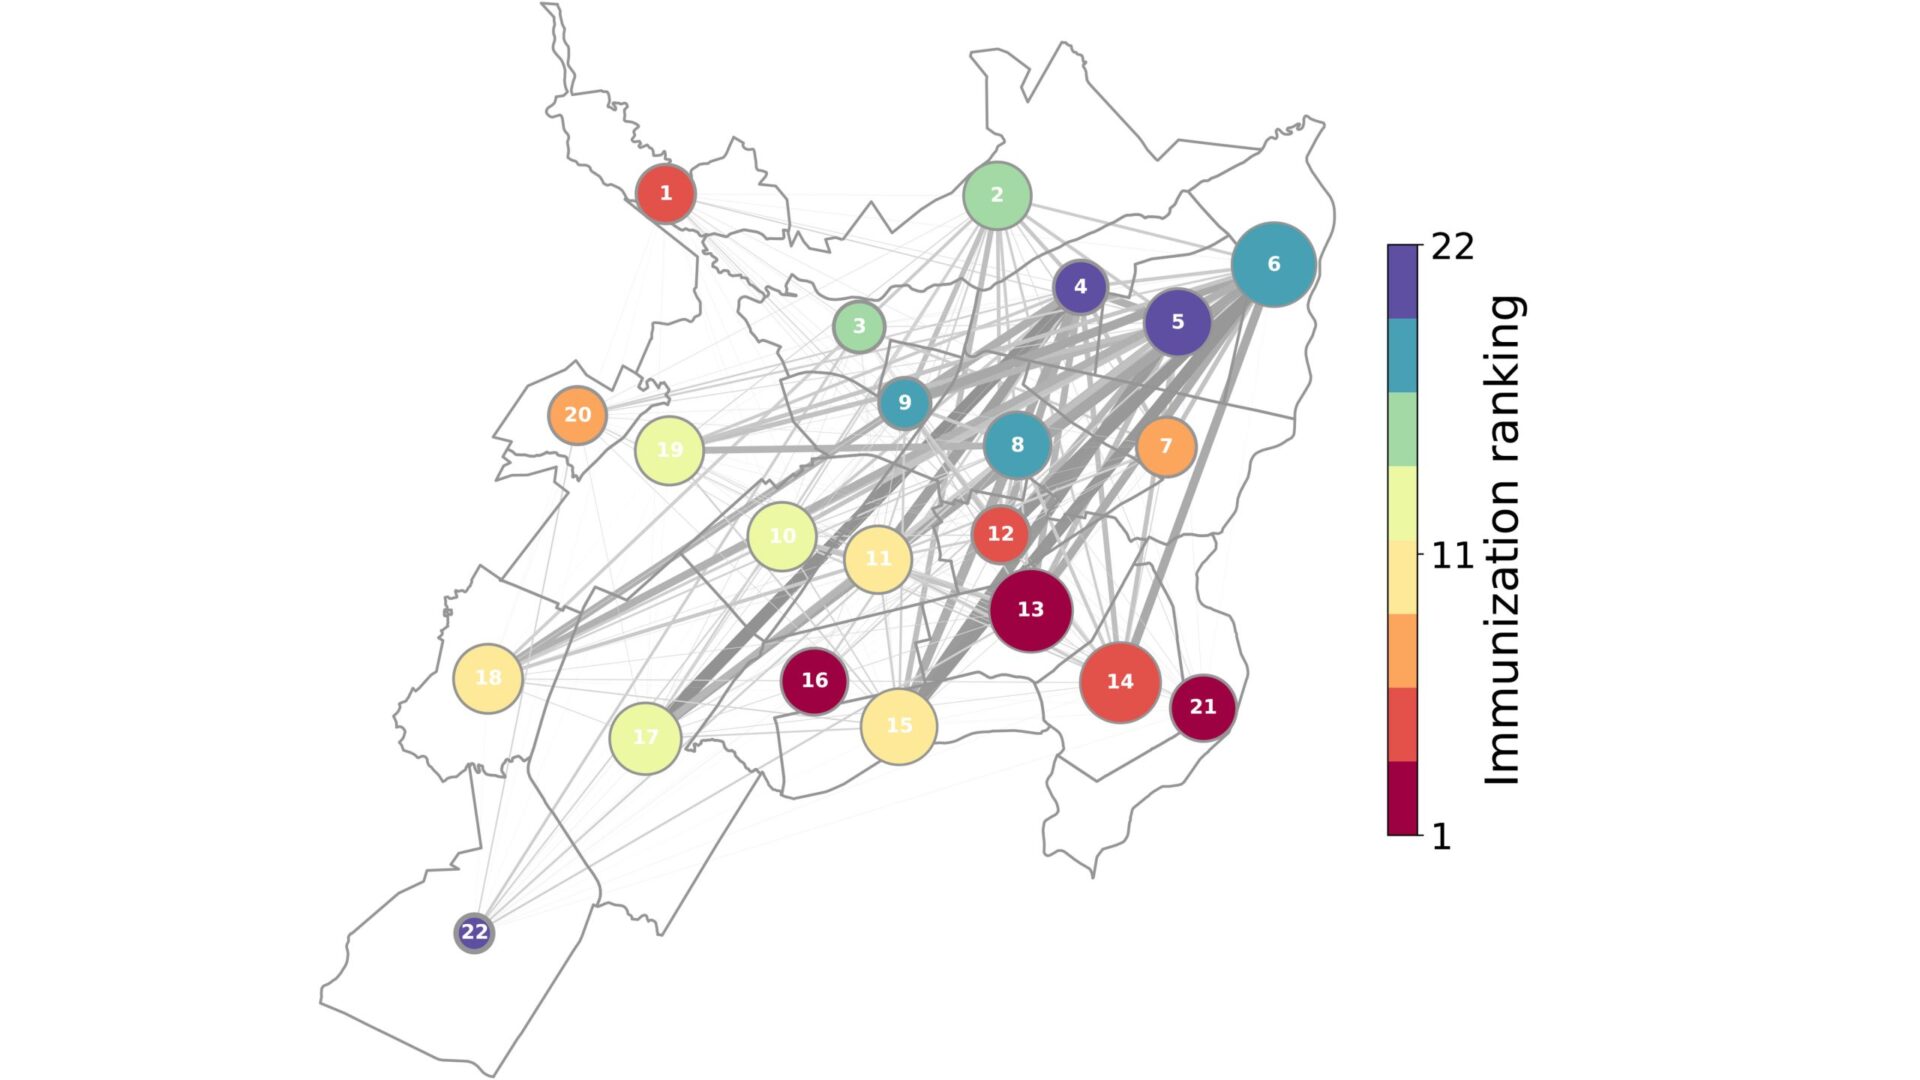 The map represents the city of Santiago de Cali as a network in which nodes represent its districts. The sizes of the nodes are proportional to the human population in each district, while the nodes are colored according to their importance for the release of Wolbachia-carrying mosquitoes. The links in the network represent mobility flows between Cali's districts. CREDIT Adriana Reyna-Lara